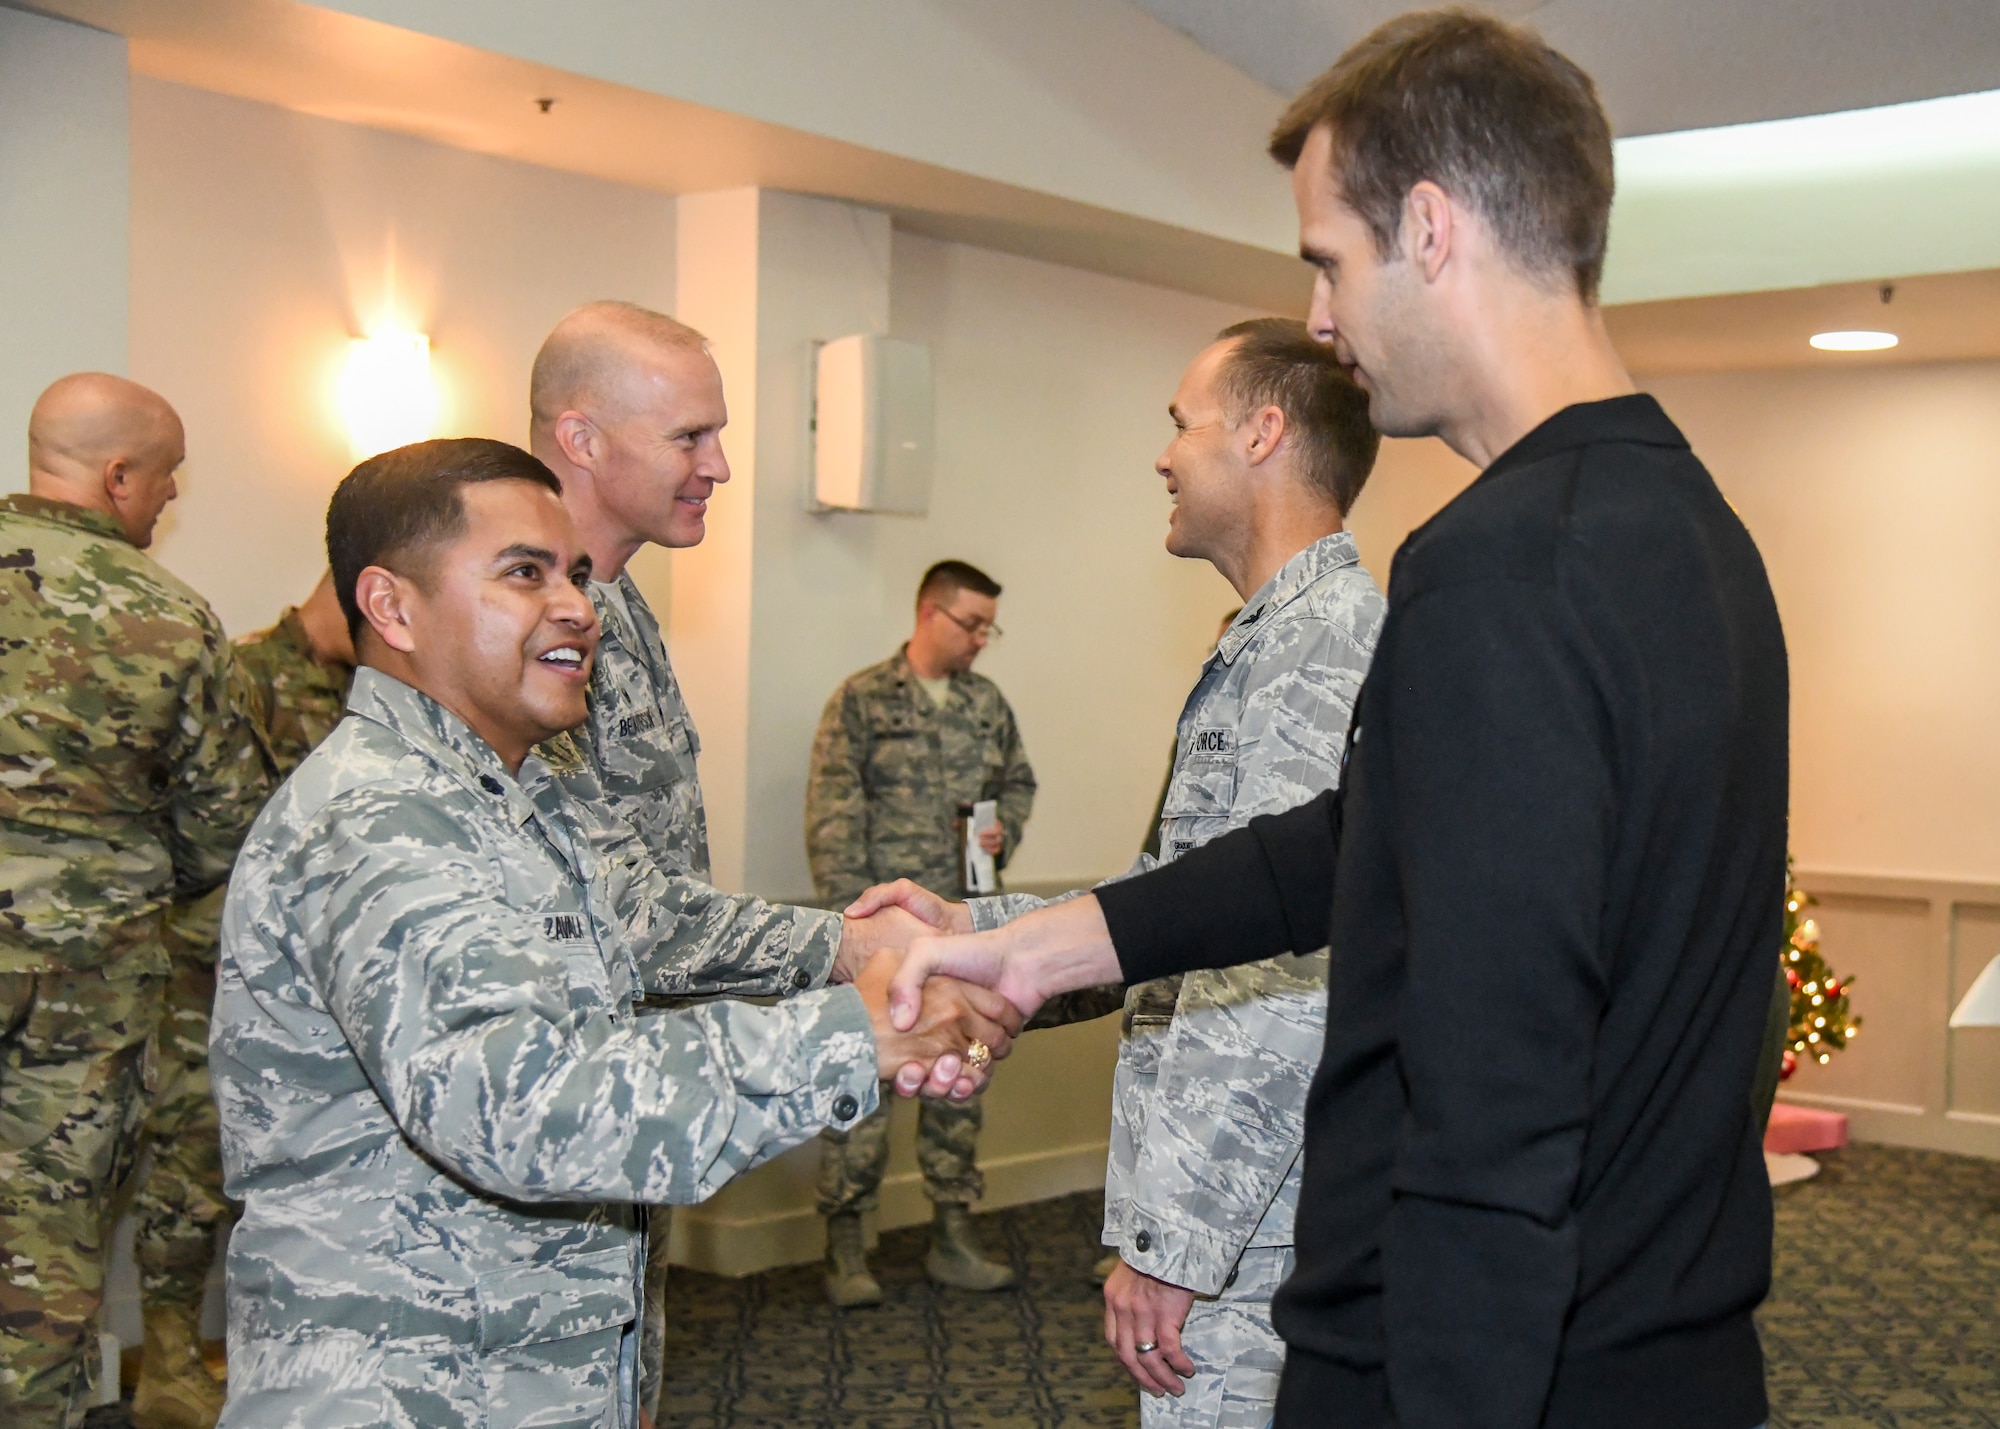 Lt. Col. Ever Zavala, Commander of Detachment 1, 47th Cyberspace Test Squadron, 96th Cyberspace Test Group, 96th Test Wing, greets members of Team Edwards following the detachment’s activation ceremony at Edwards Air Force Base, California, Nov. 19. (Air Force photo by Giancarlo Casem)